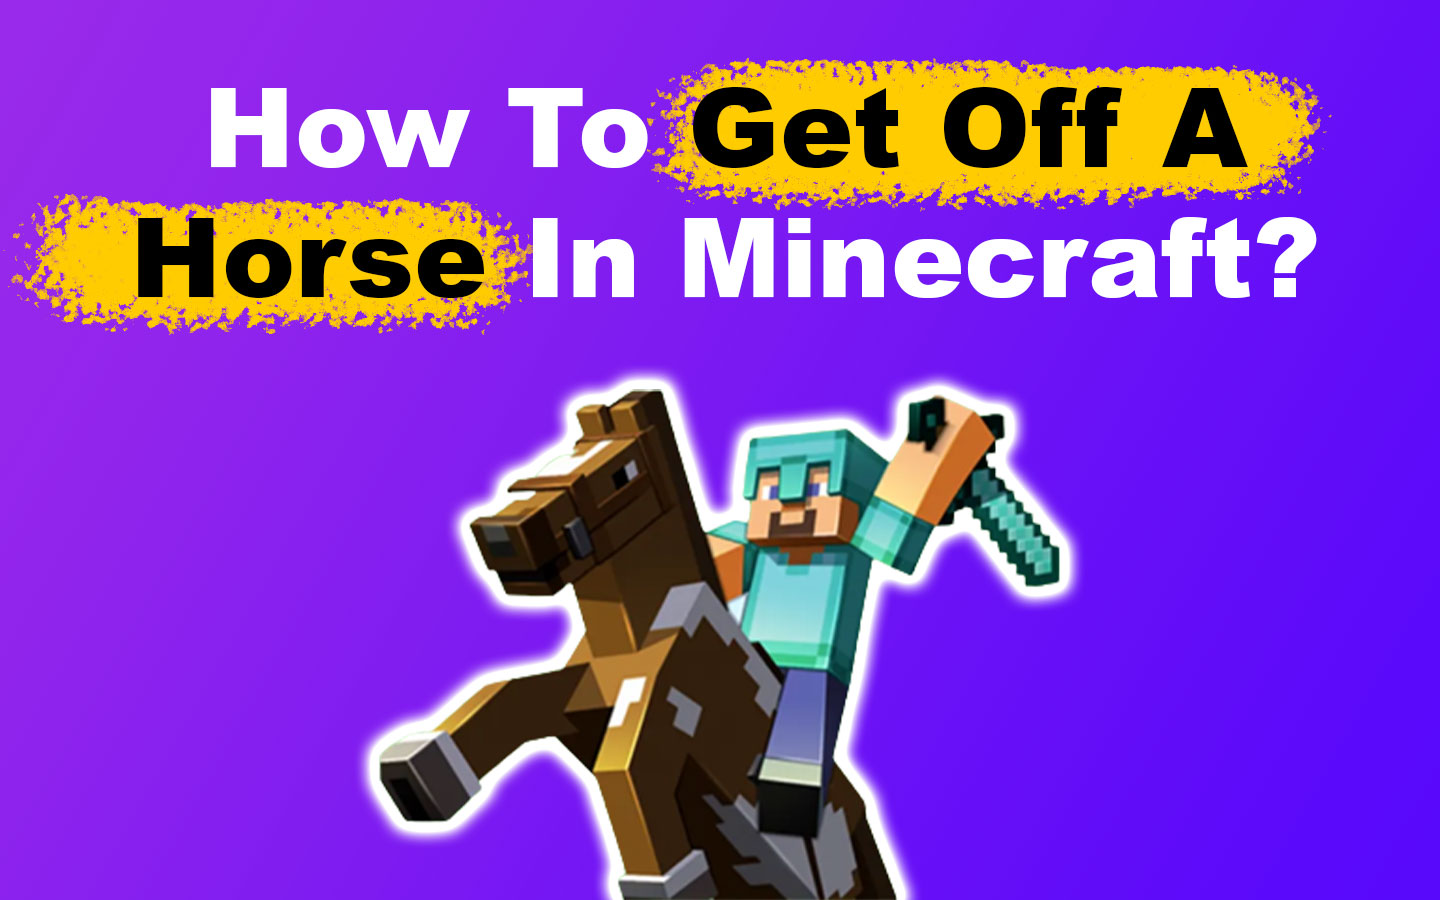 How To Get Off A Horse In Minecraft